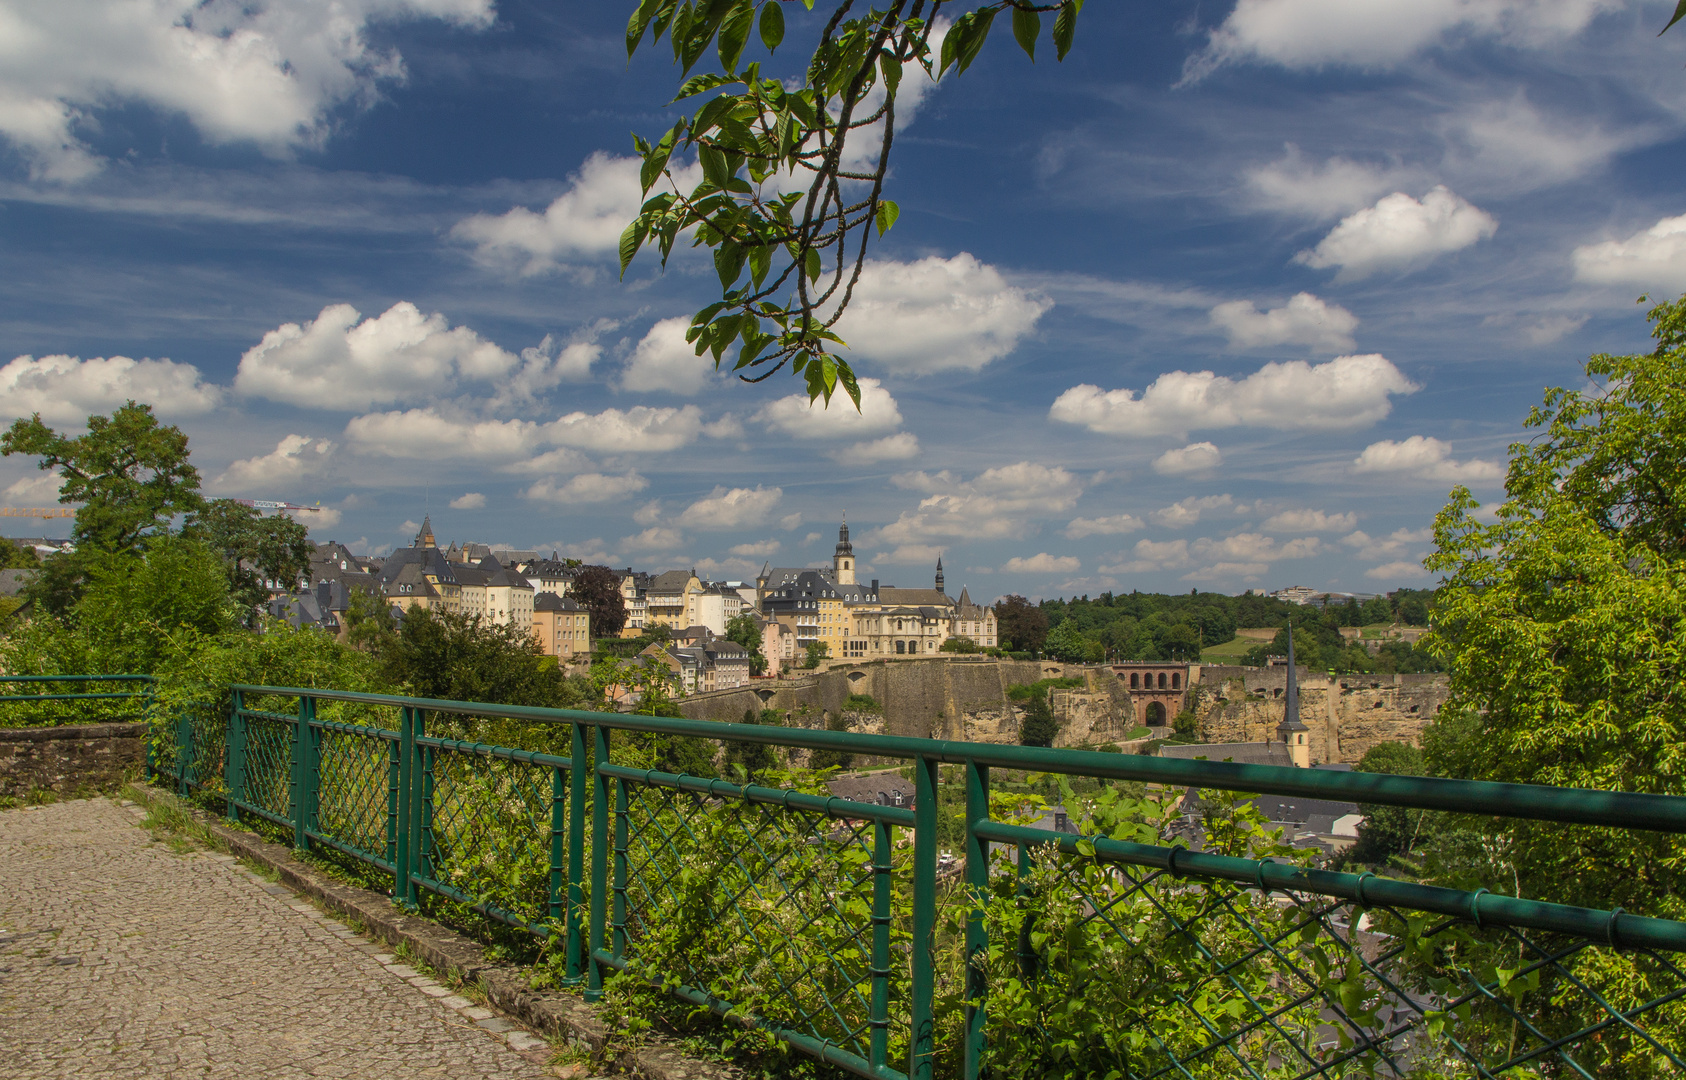 Picture point en luxembourg